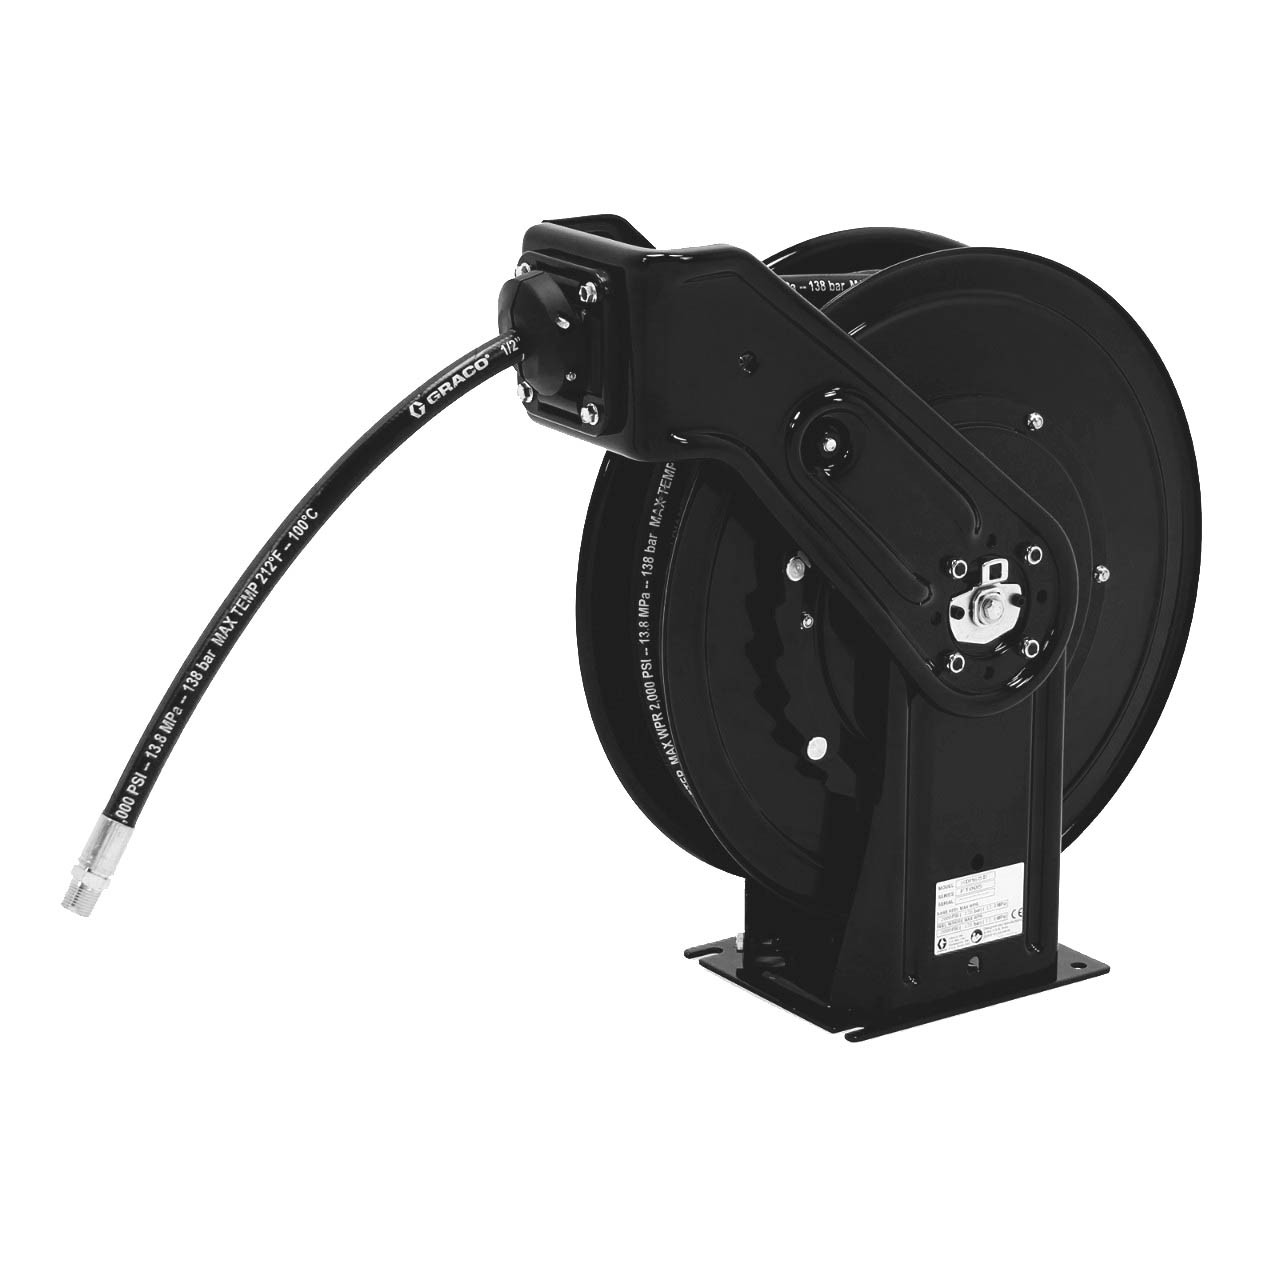 Graco SDL6HD - SDX20, 1/2 x 50' Air/Water Hose Reel Bench Mount, Black by FastoolNow